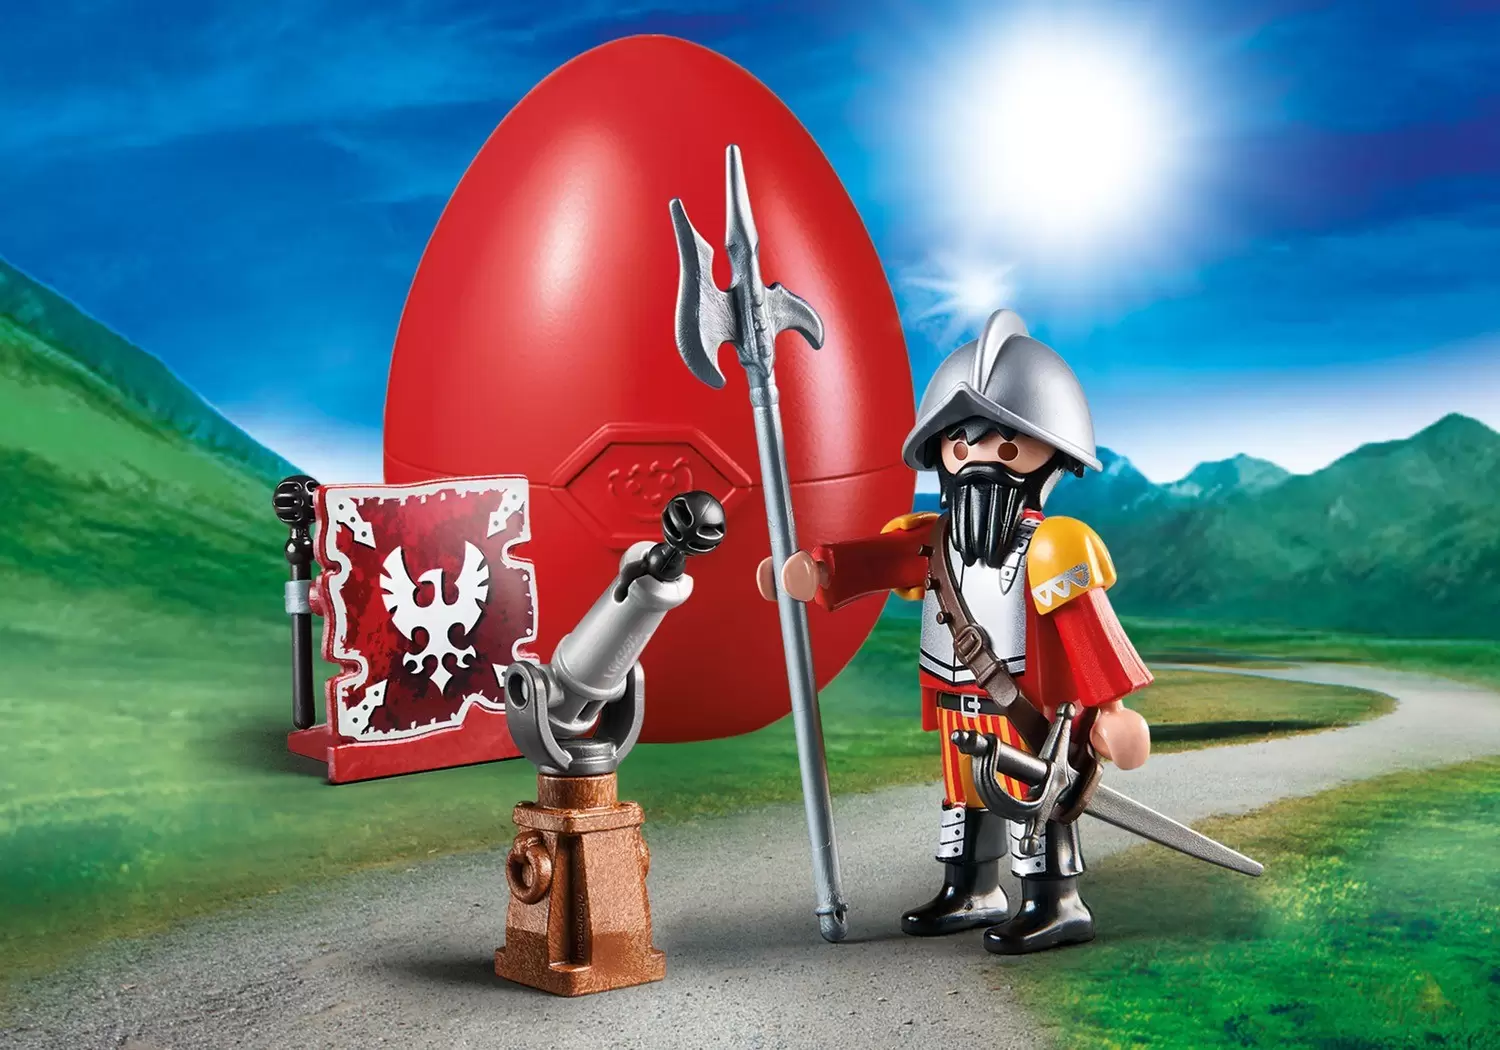 Playmobil Middle-Ages - Conquistador Easter egg